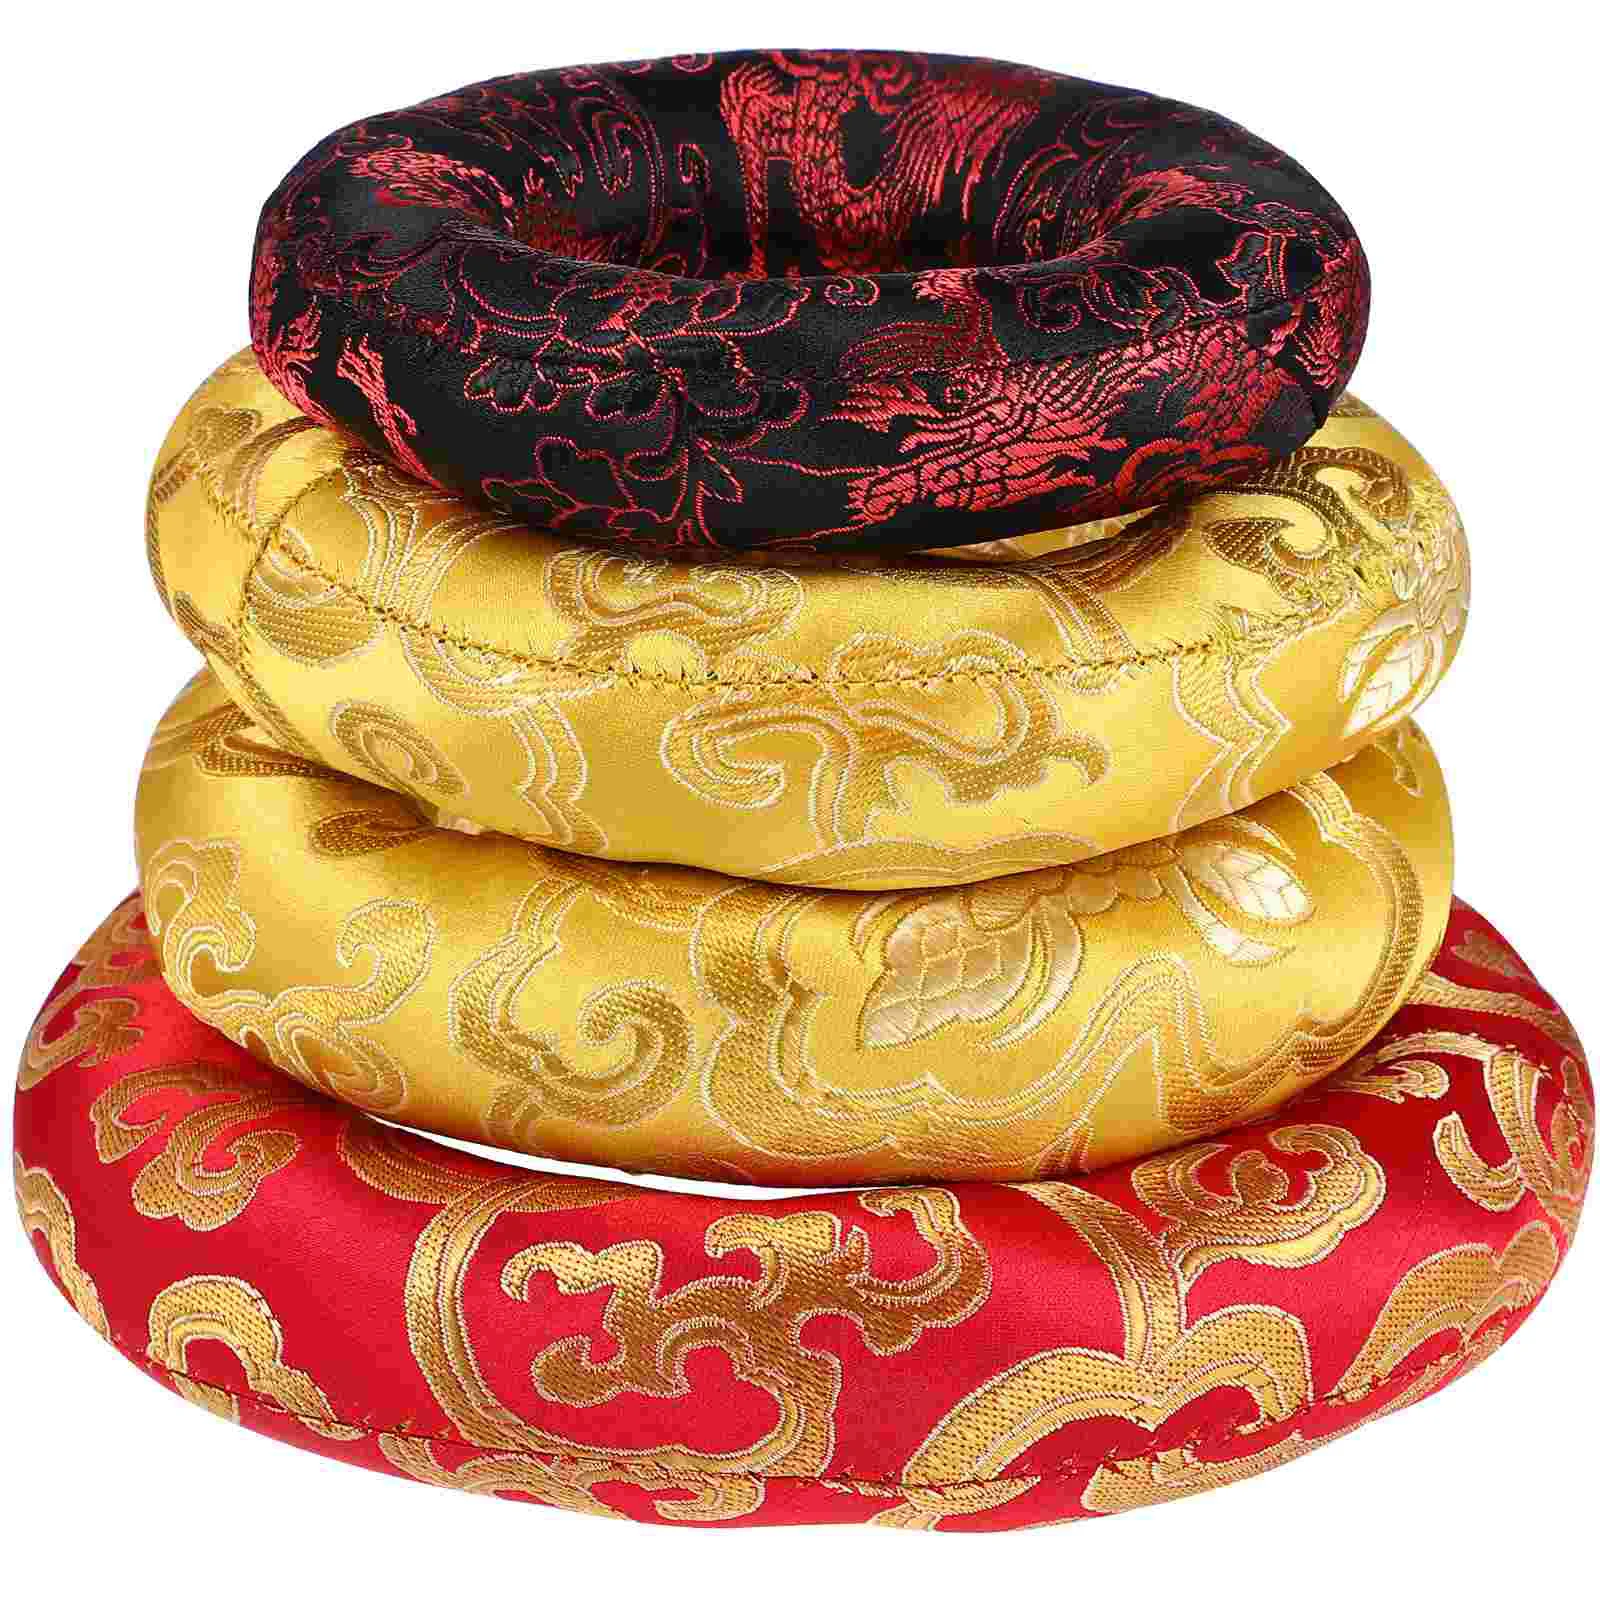 

4pcs Portable Multifunctional Sturdy Practical Useful Decor For Tables Supply Singing Bowls Base Singing Bowl Mat